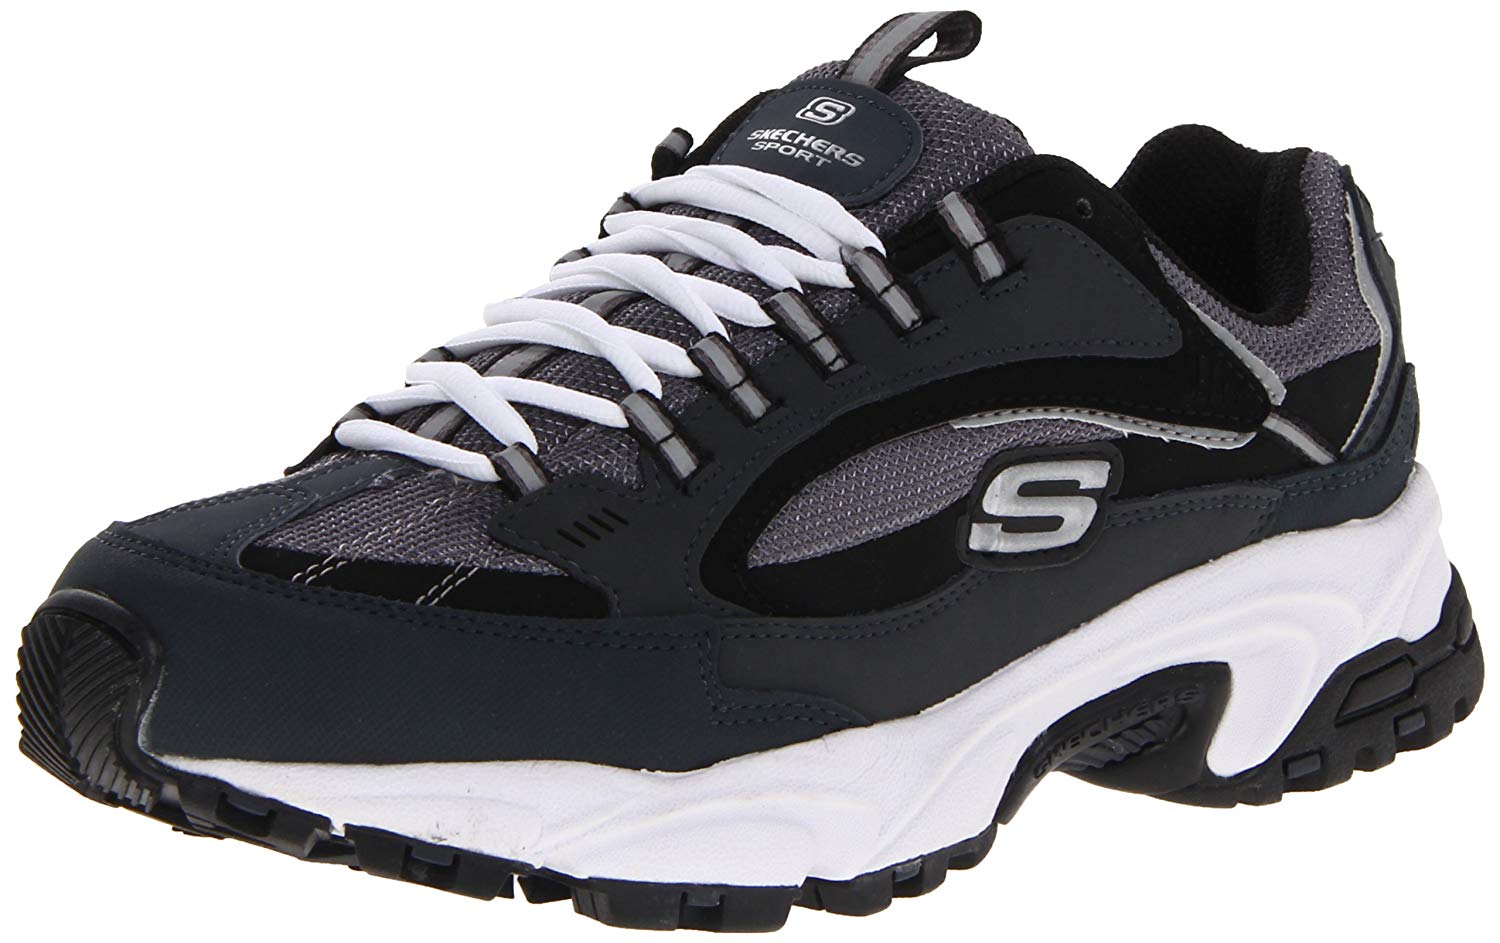 Skechers Mens Cutback 51286 Low Top Lace Up Running, Navy/Black, Size 9 ...